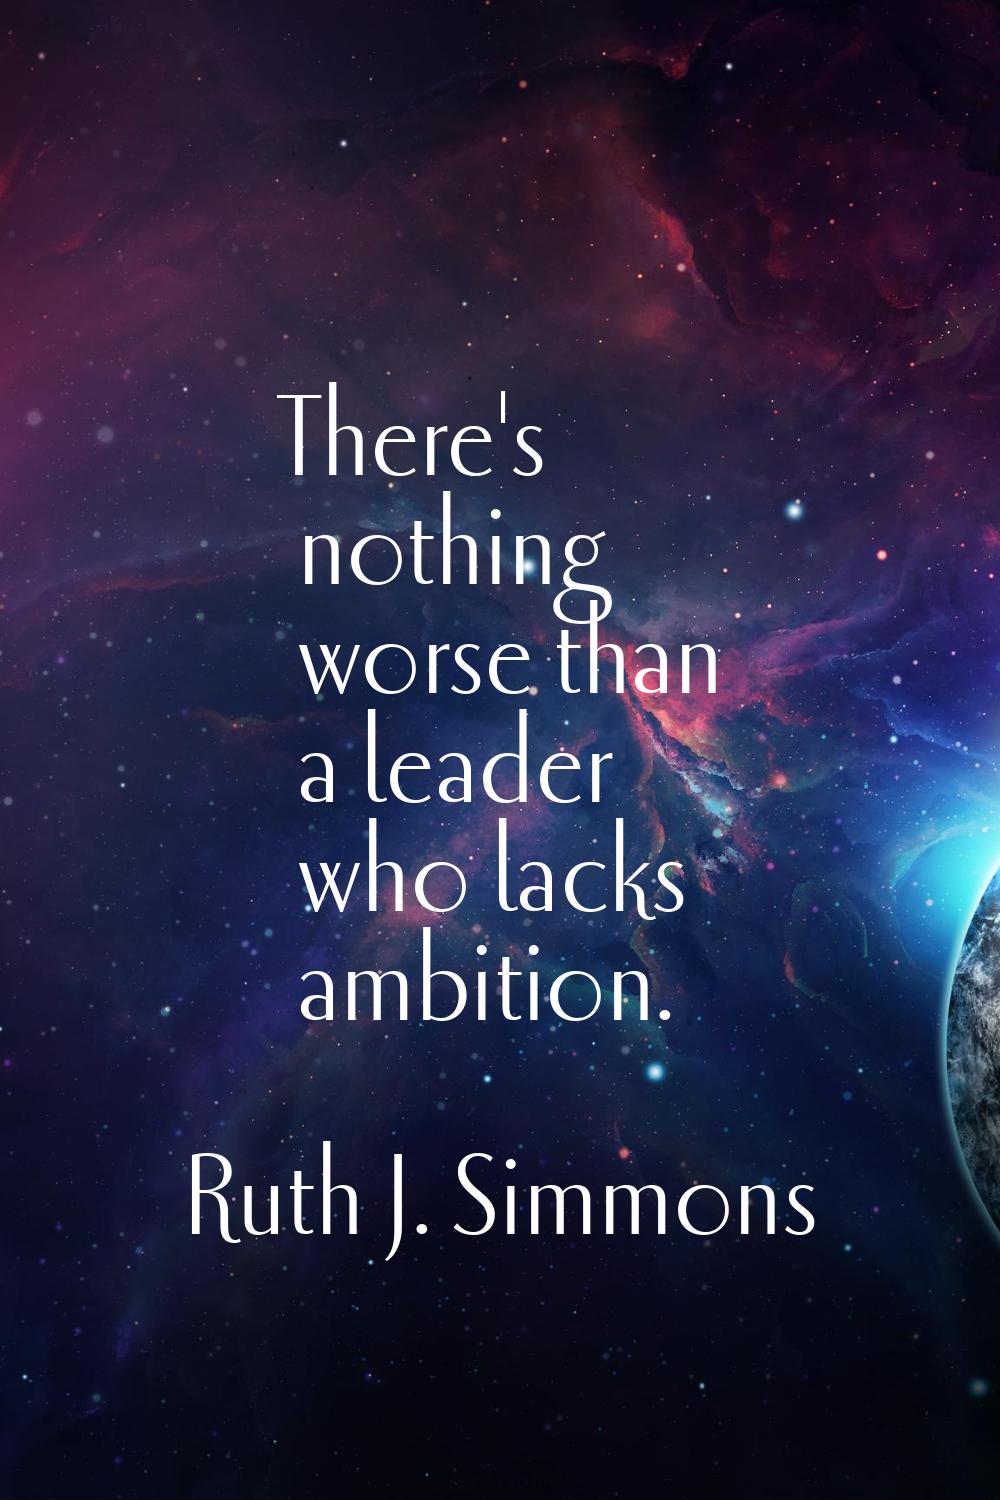 There's nothing worse than a leader who lacks ambition.